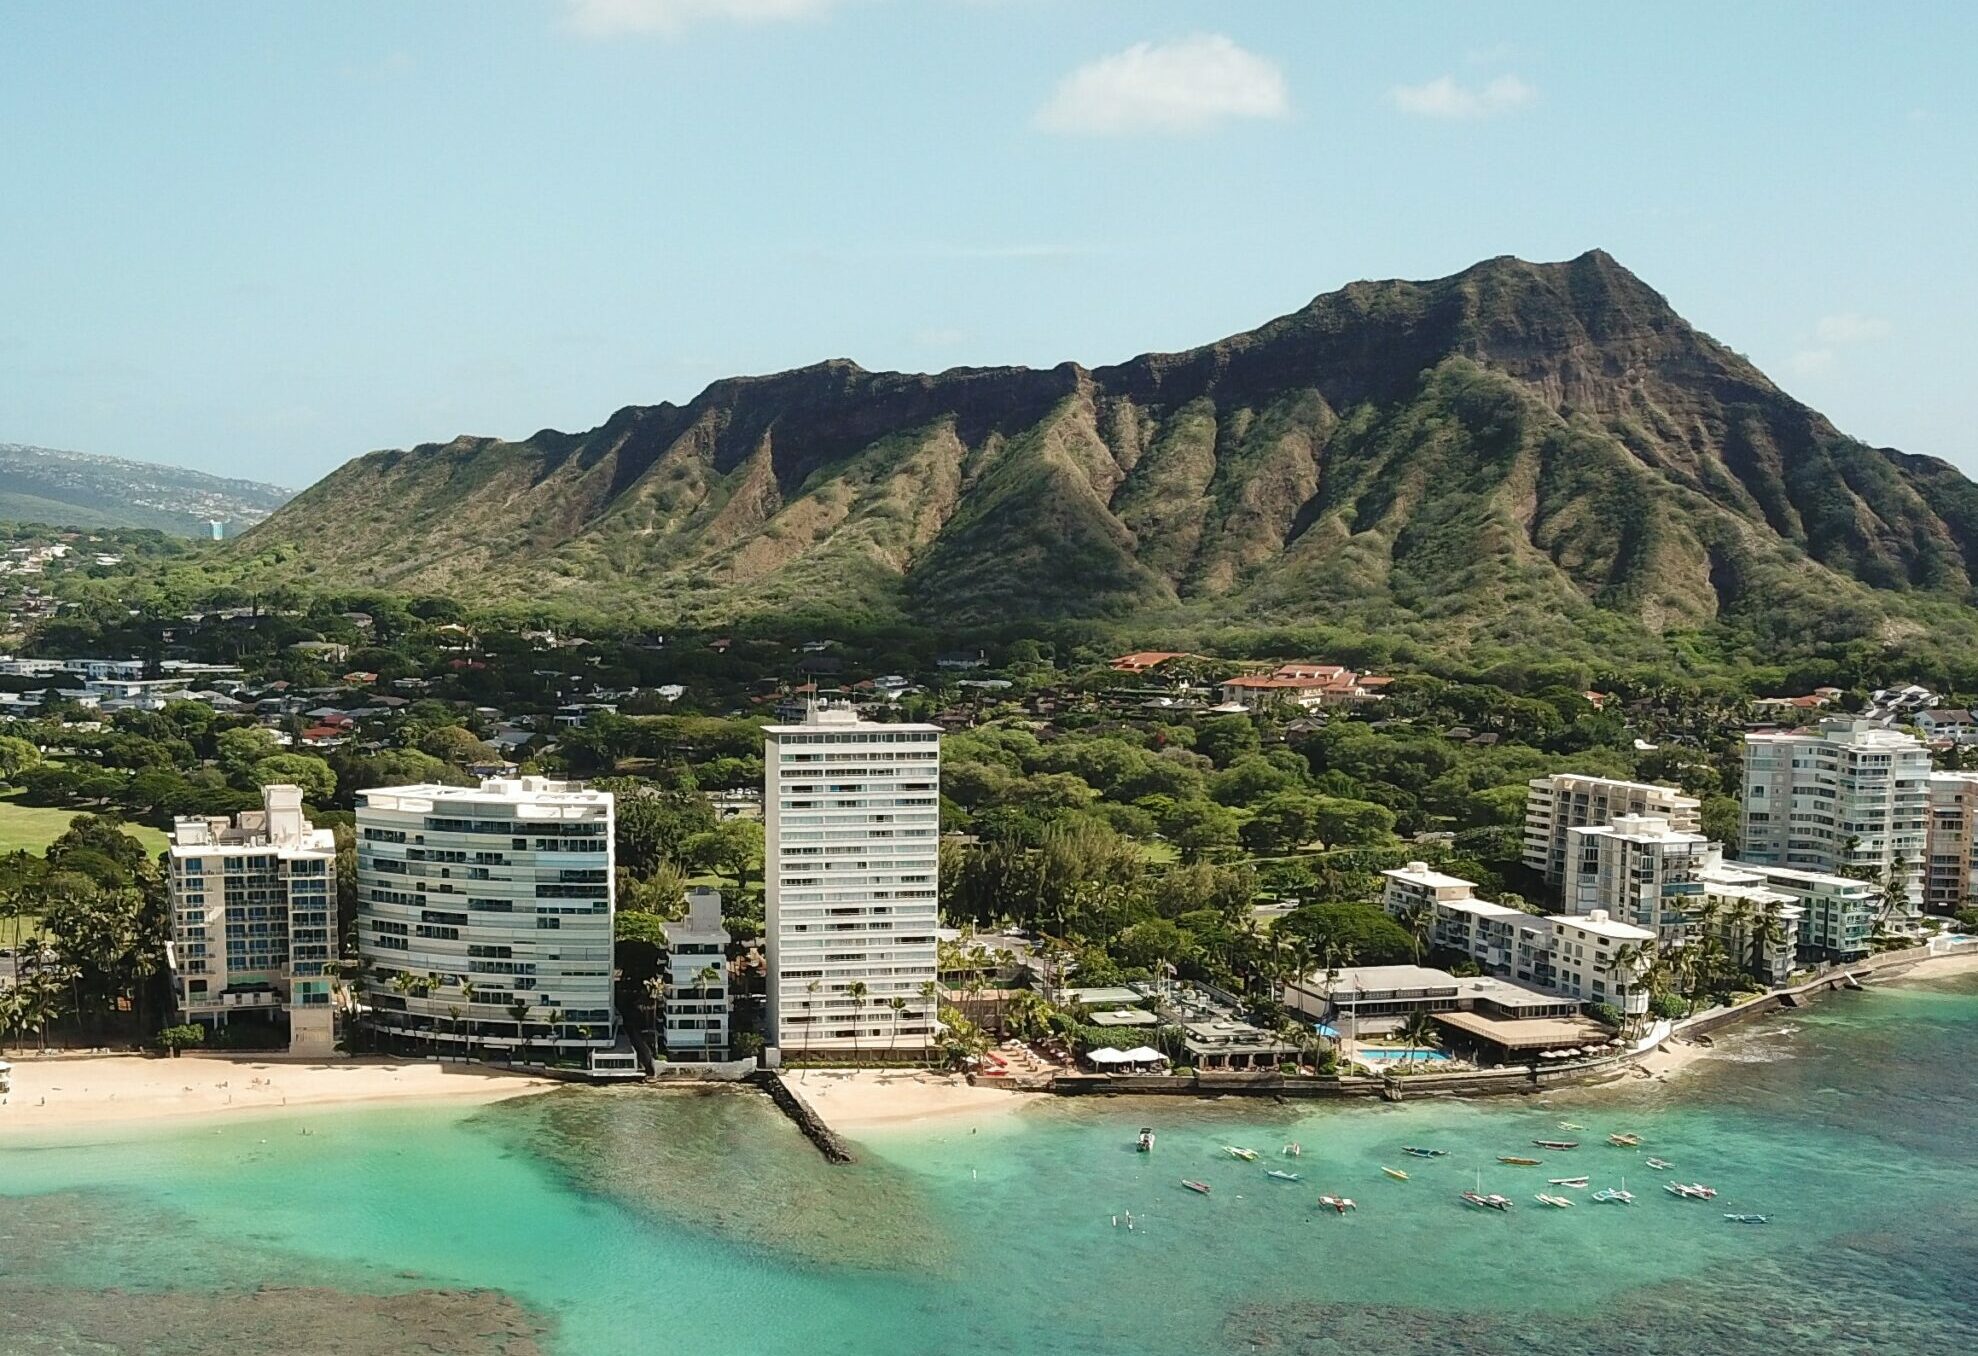 Waikiki Beach with Diamond Head Crater in the background.